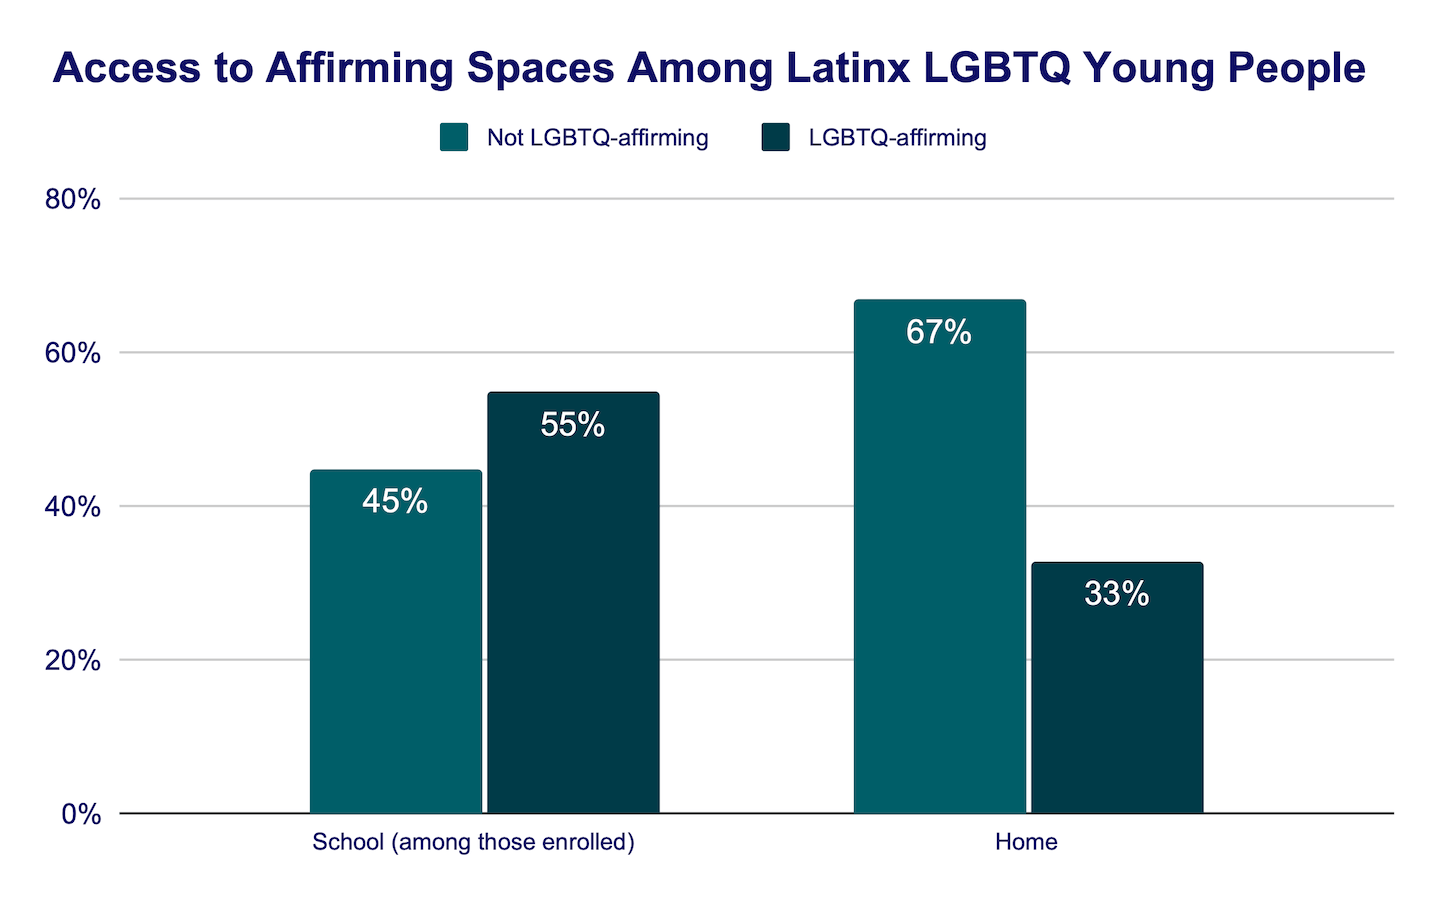 Access to affirming spaces among Latinx LGBTQ young people bar graph